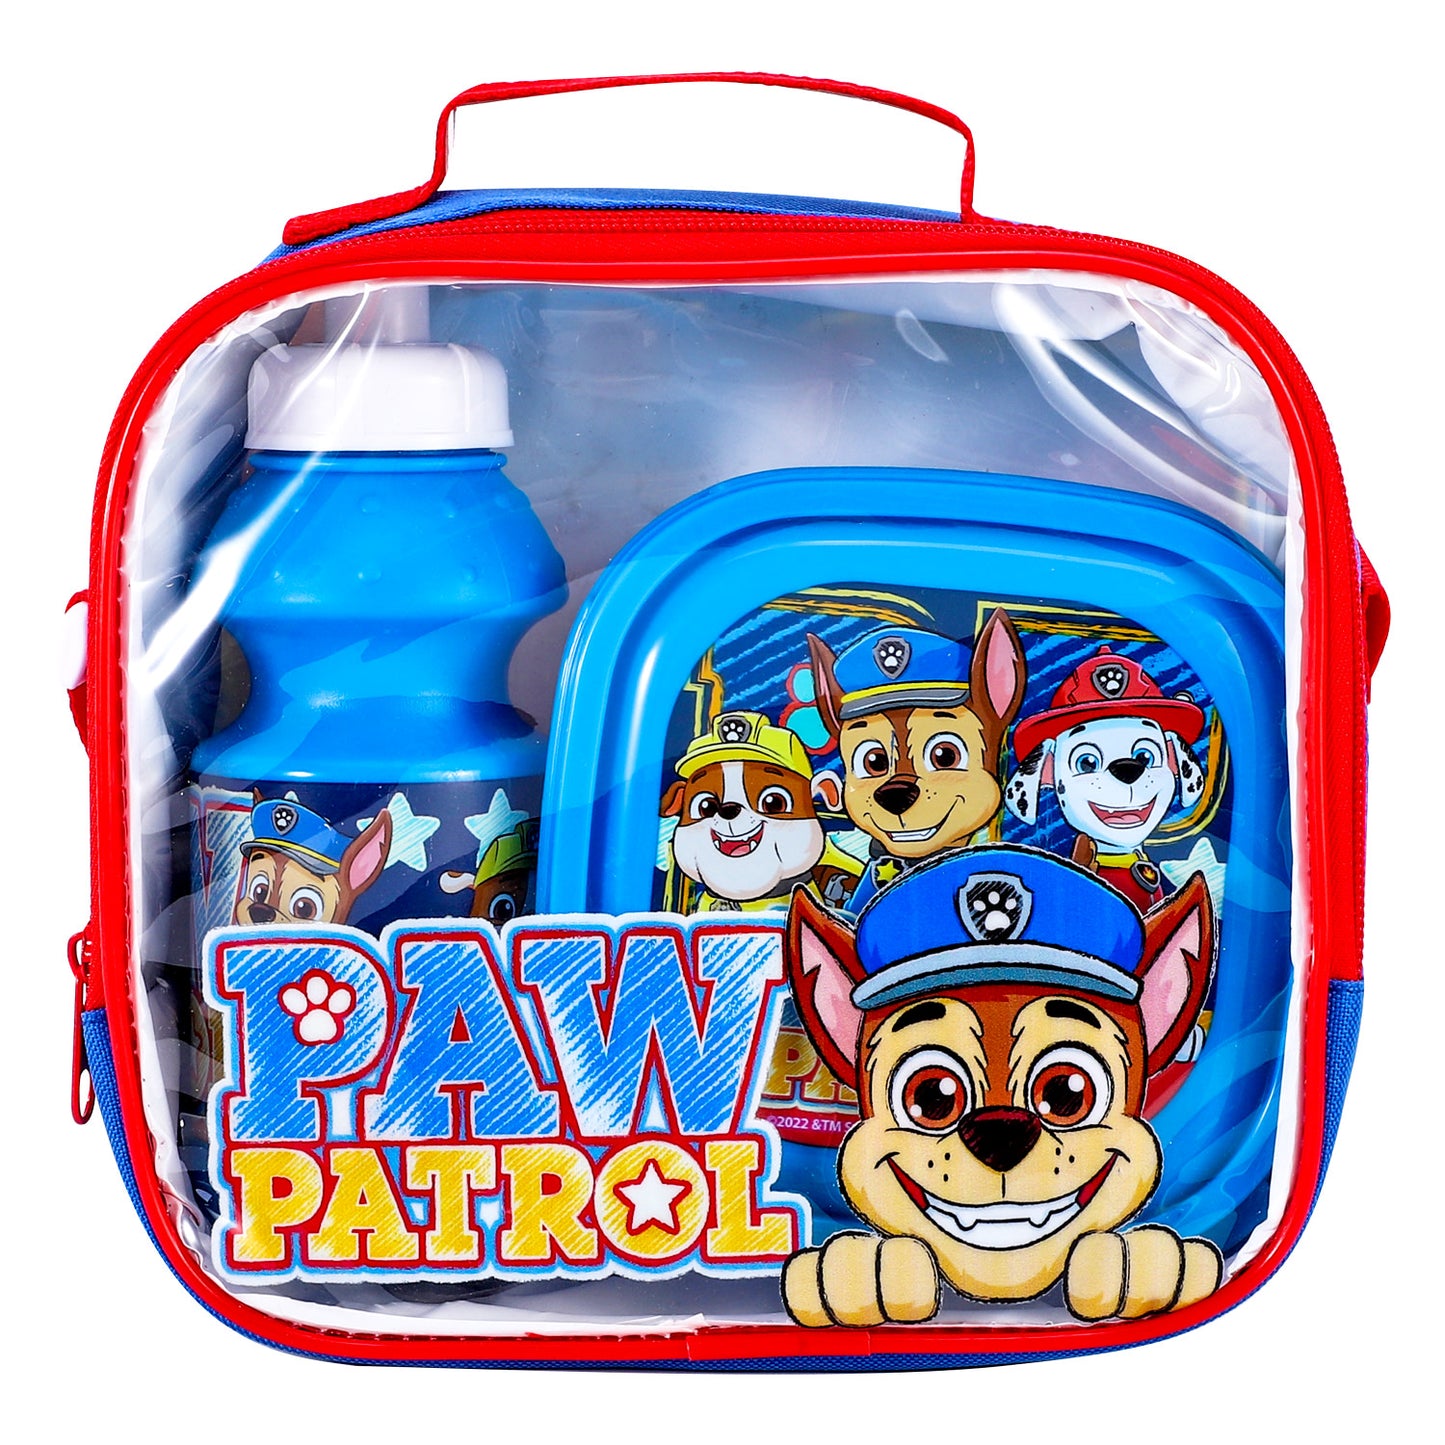 Paw Patrol 3Pc Lunch Set, Lunch Bag, Plastic Bottle, Storage Container School Day